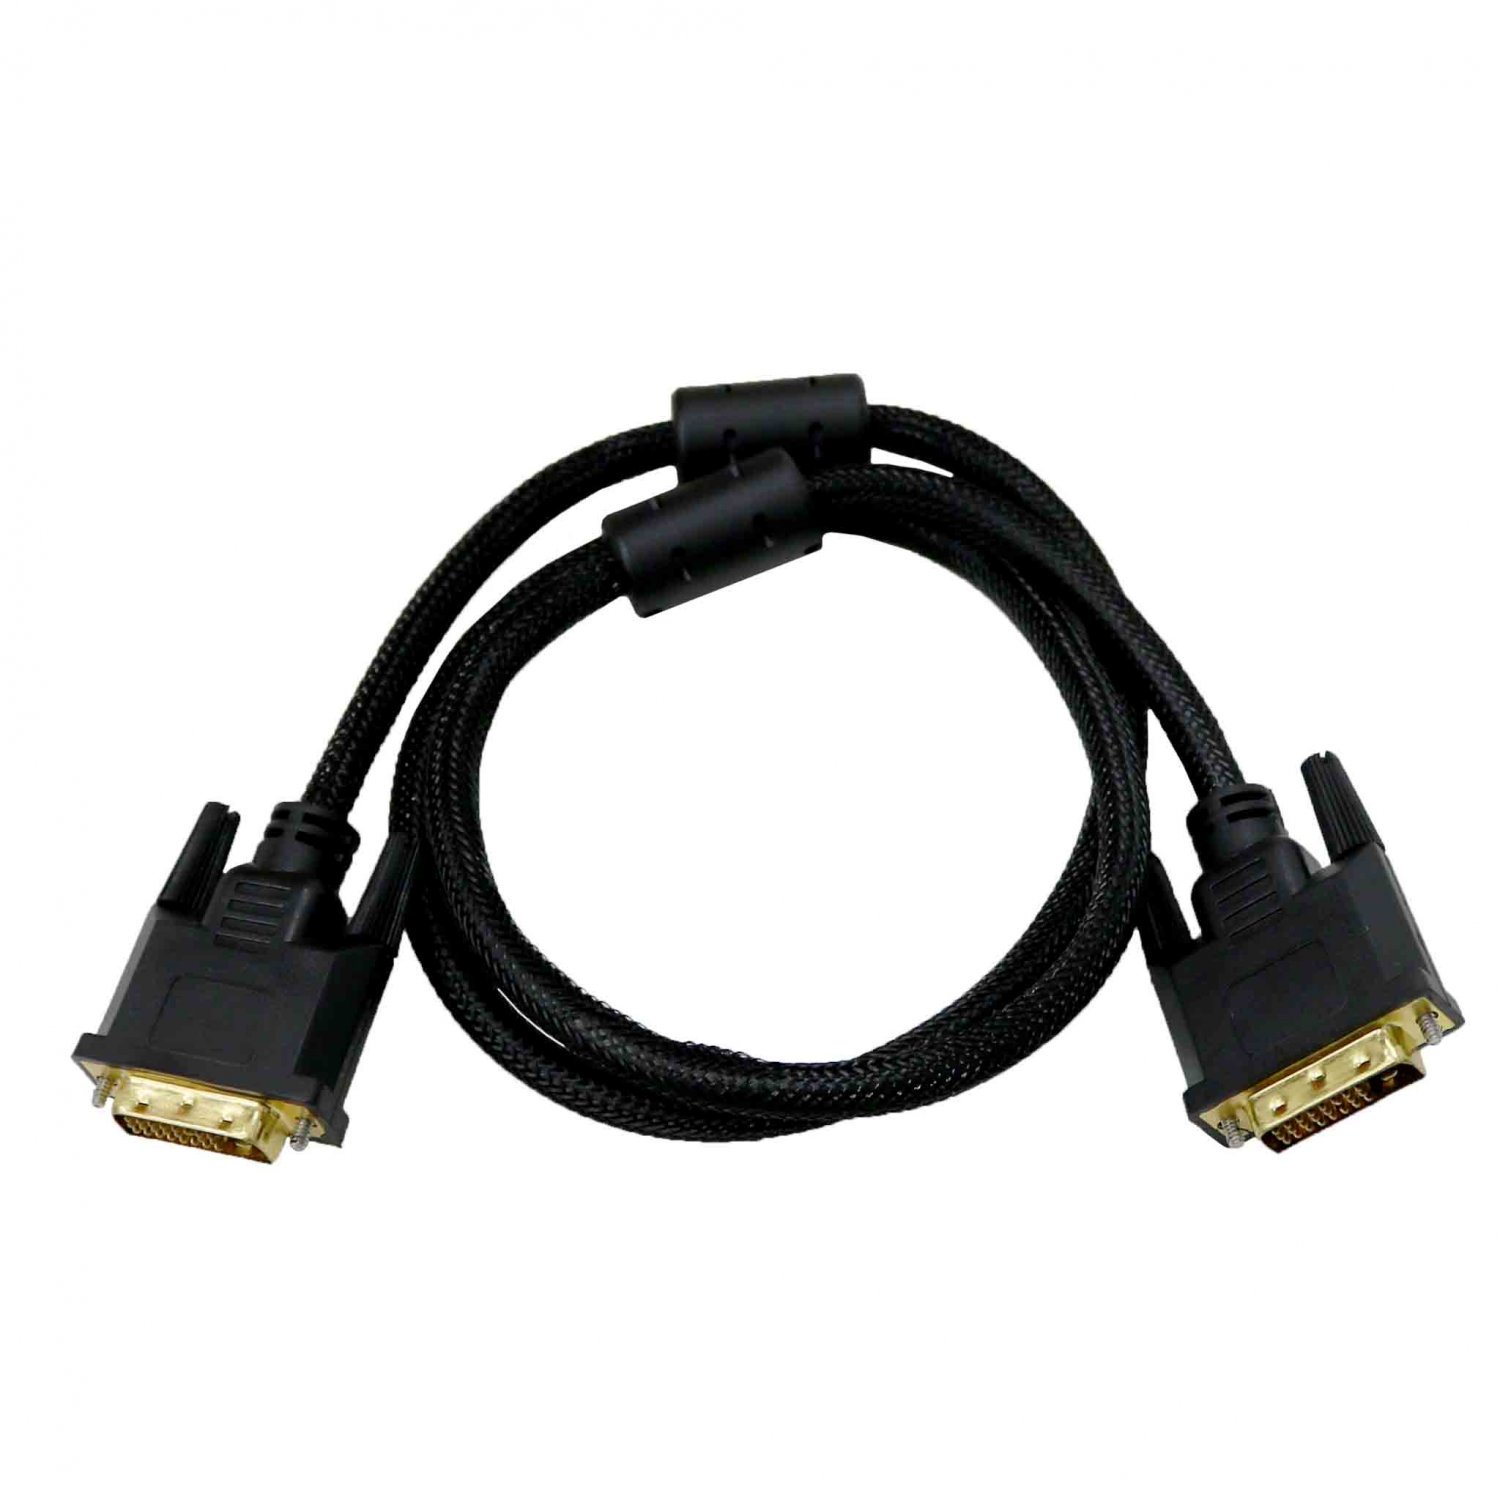 1m DVI-D 24 + 1 Pin Male to Male Dual Link Gold Cable Lead